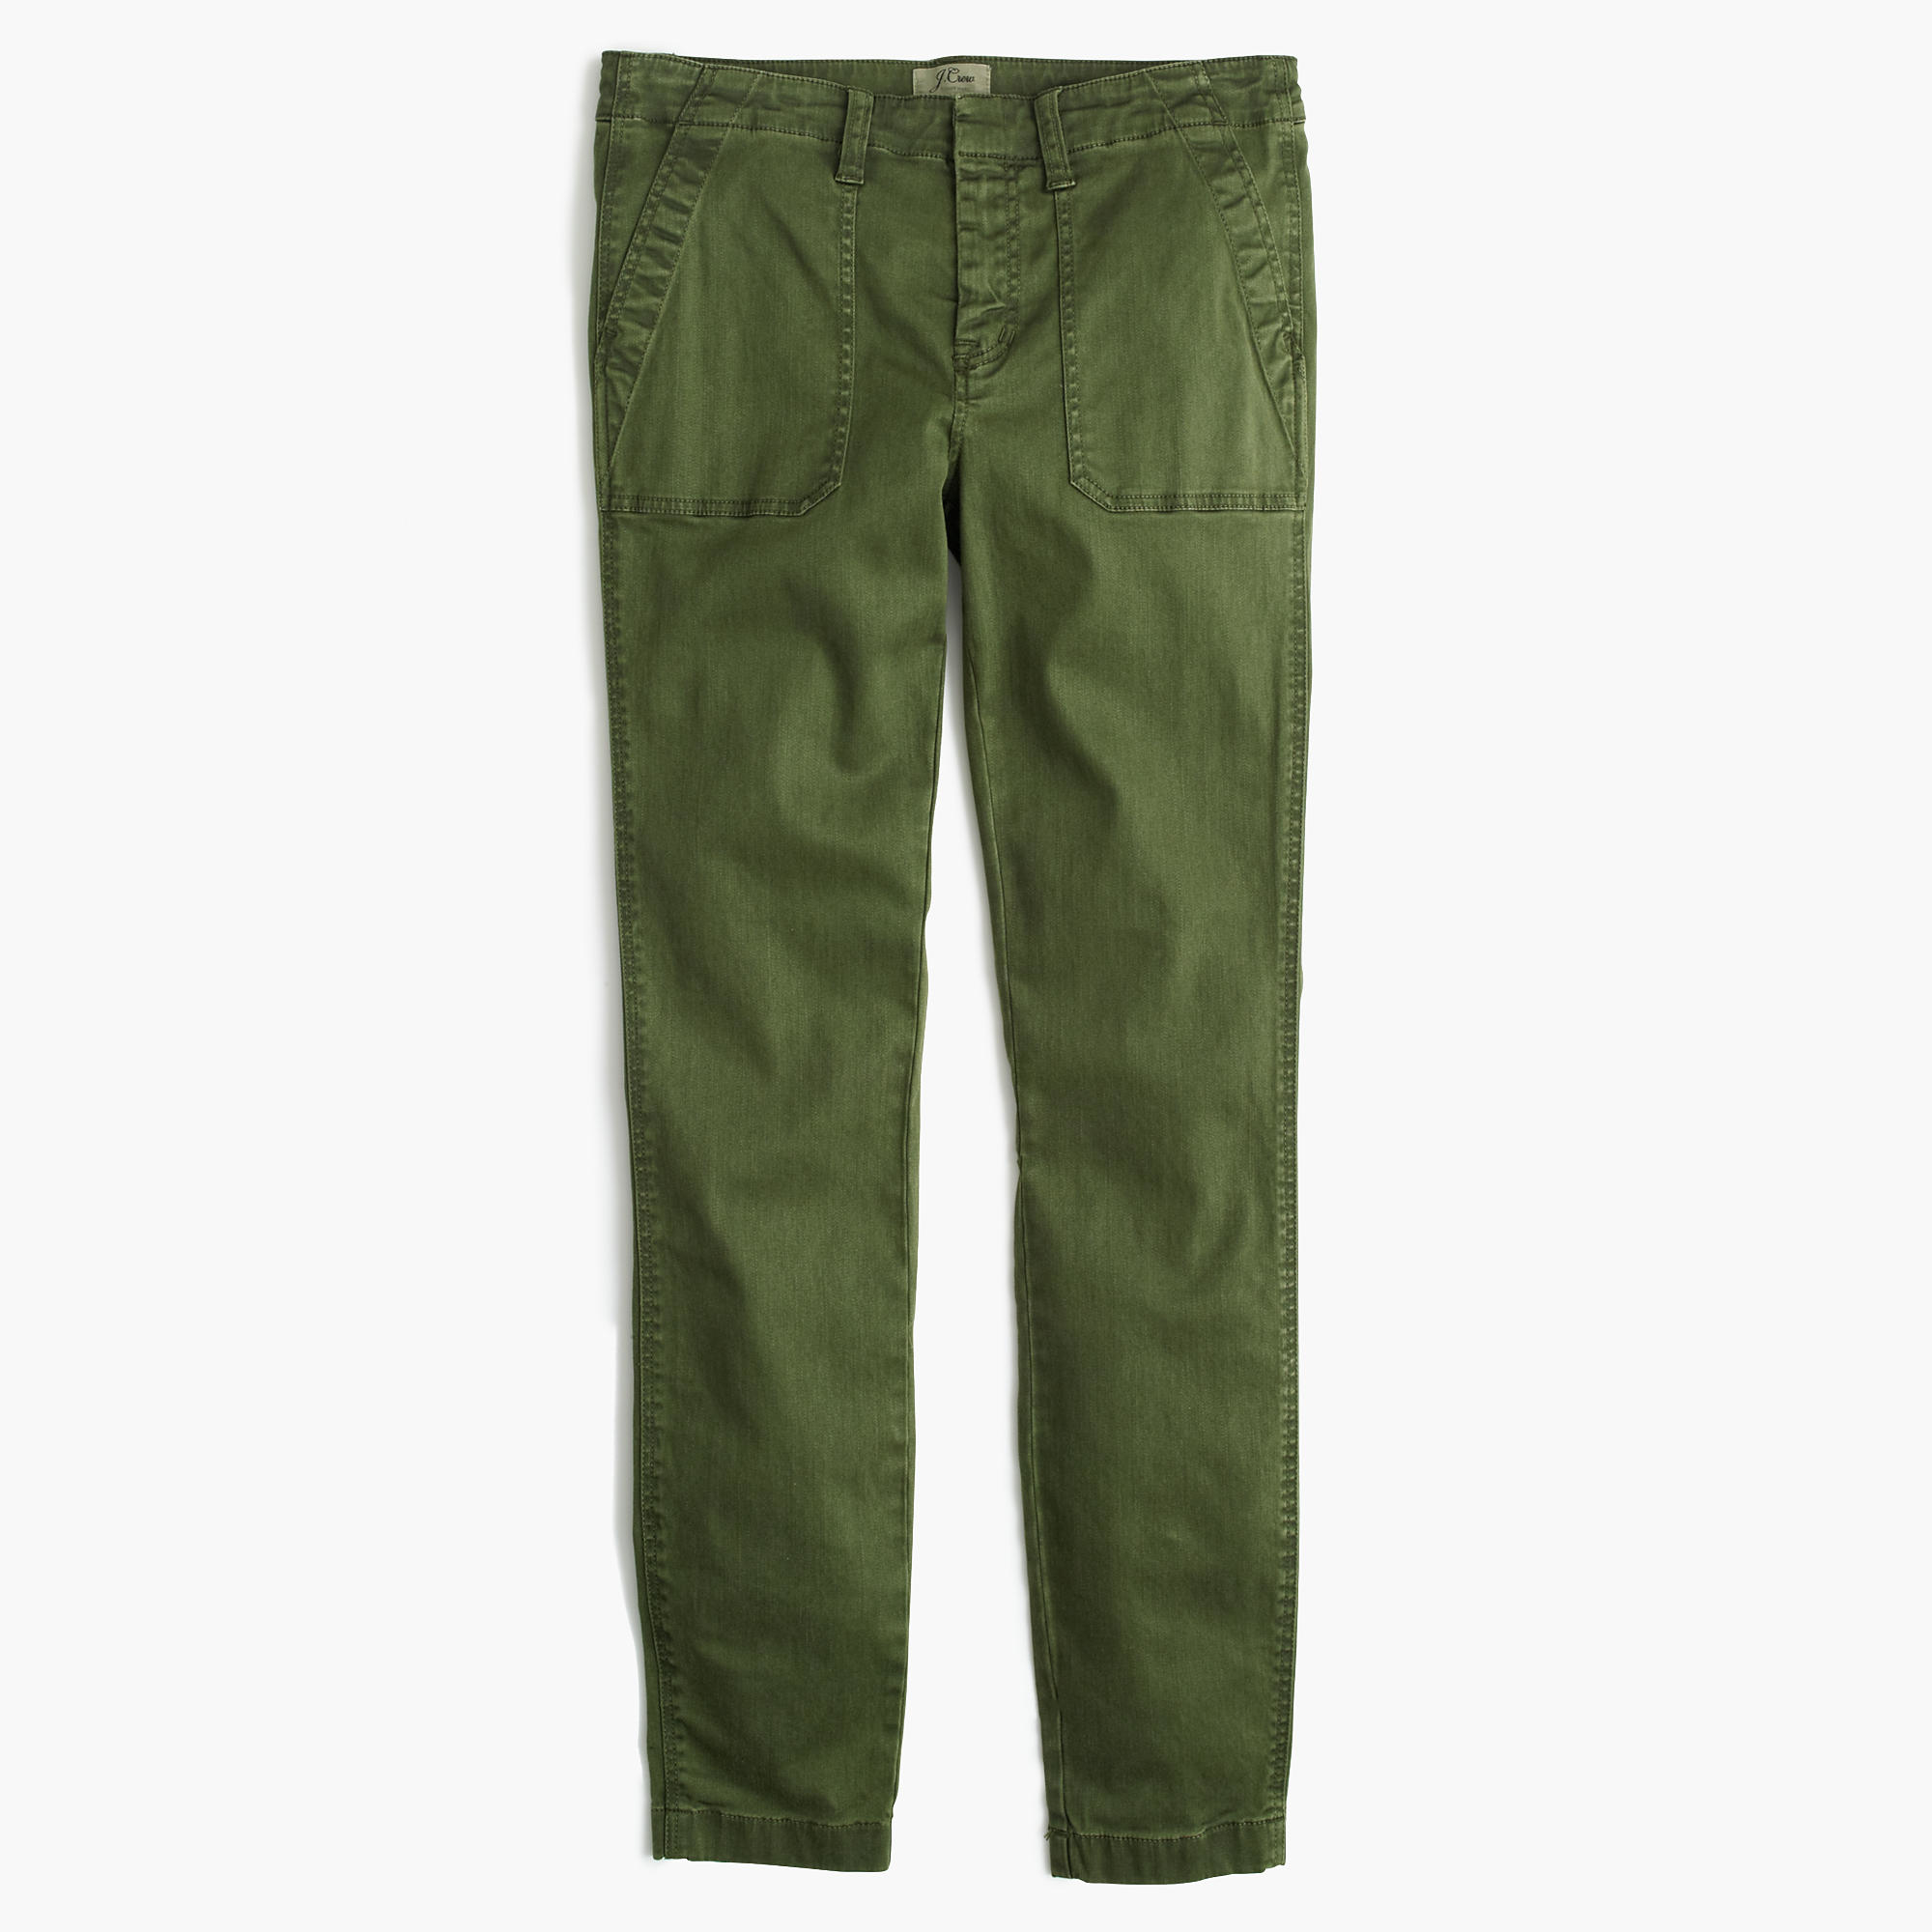 J.Crew Tall Skinny Stretch Cargo Pant in Green for Men - Lyst